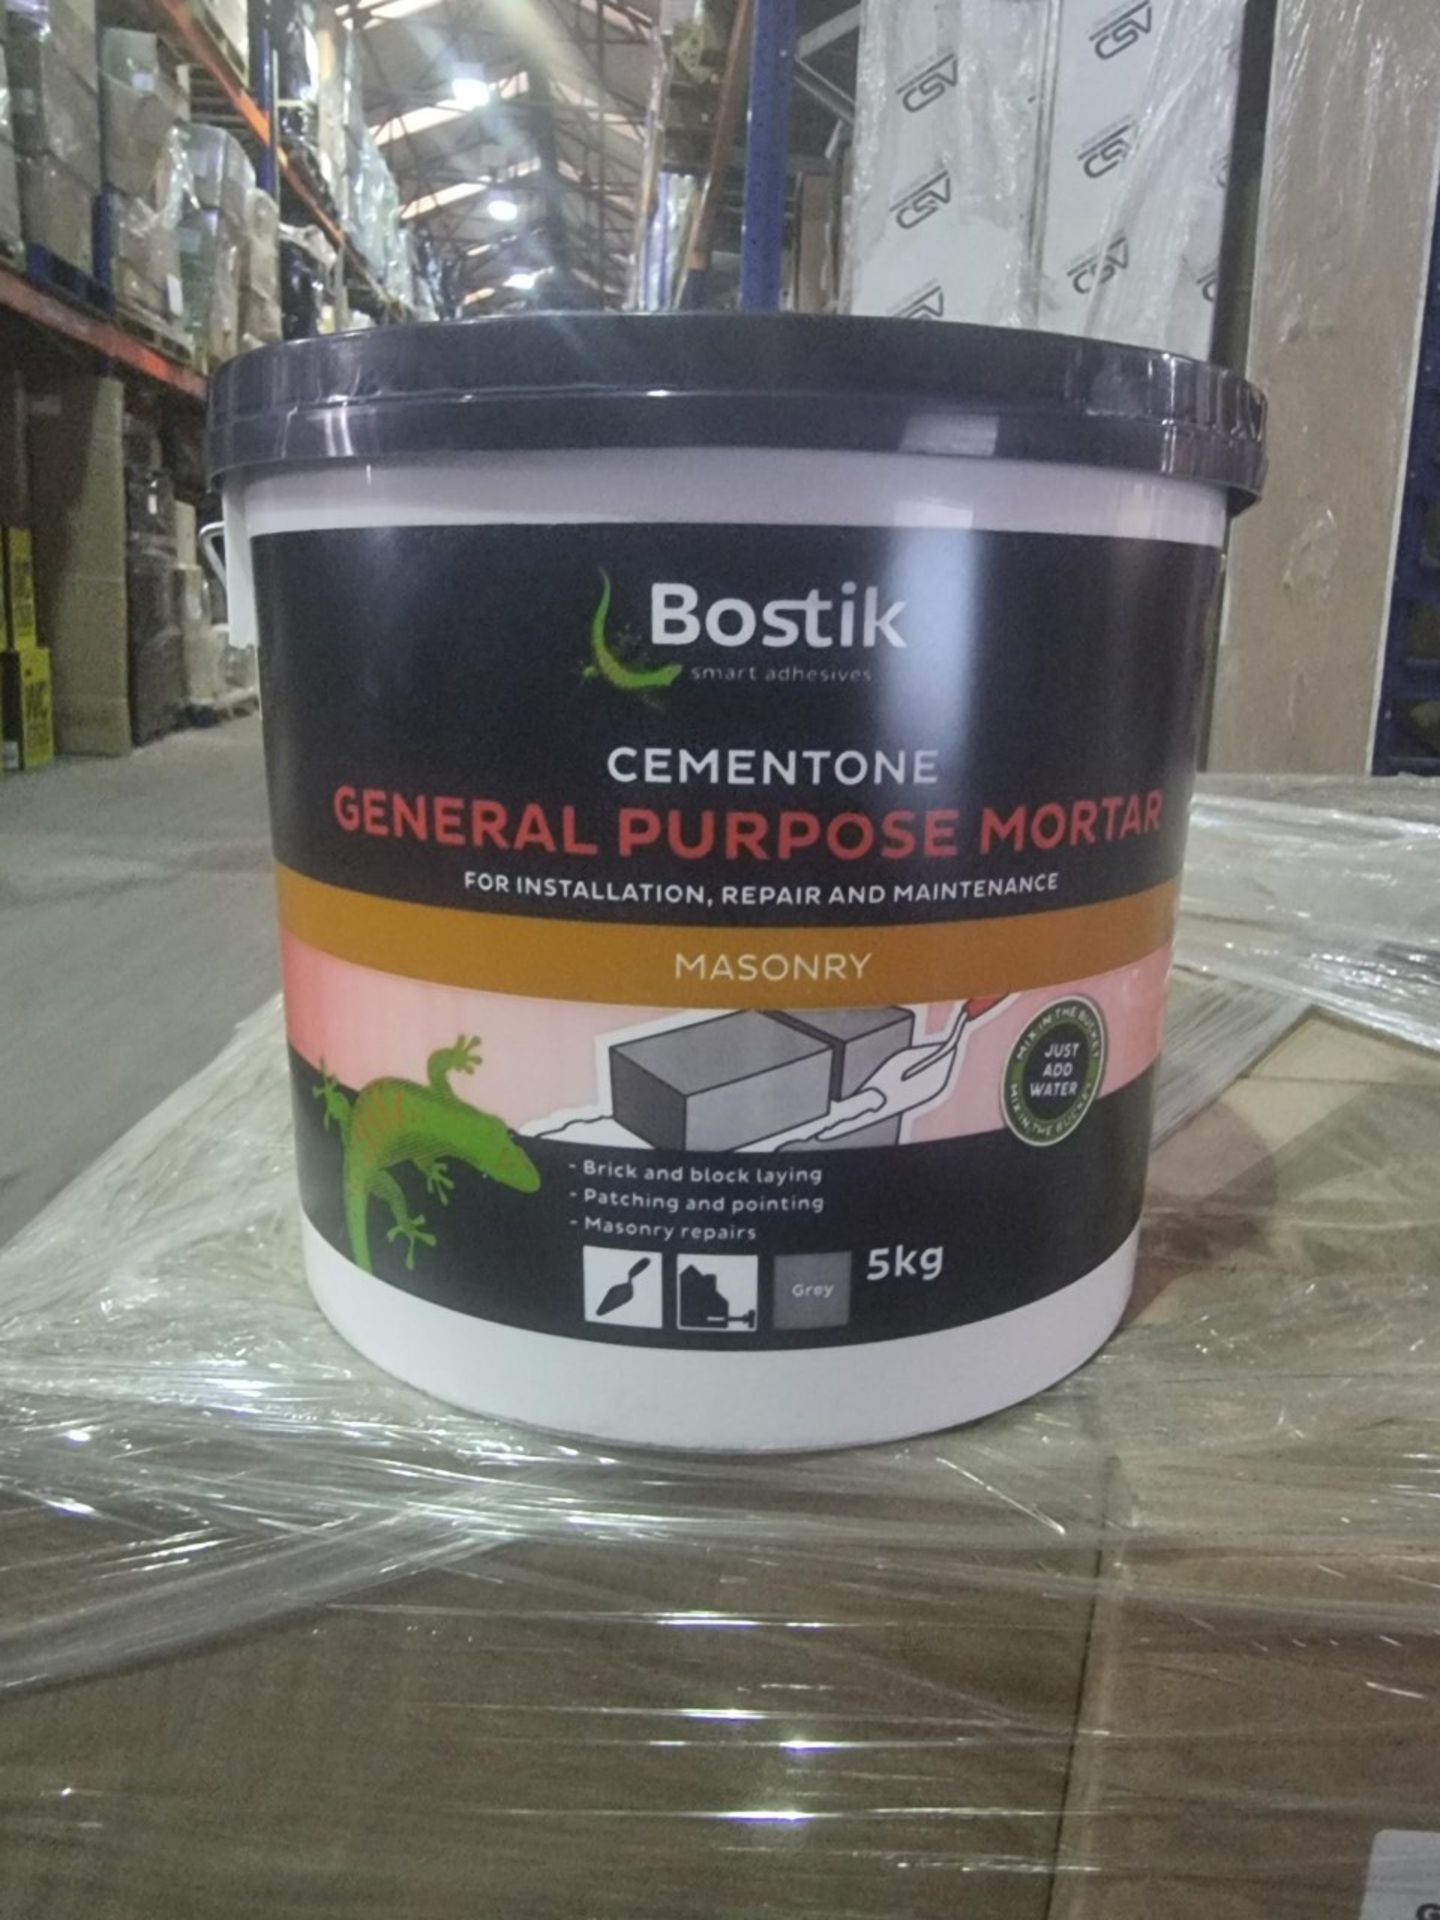 PALLET TO CONTAIN 60 x 5KG TUBS OF BOSTIK CEMENTONE GENERAL PURPOSE MORTAR